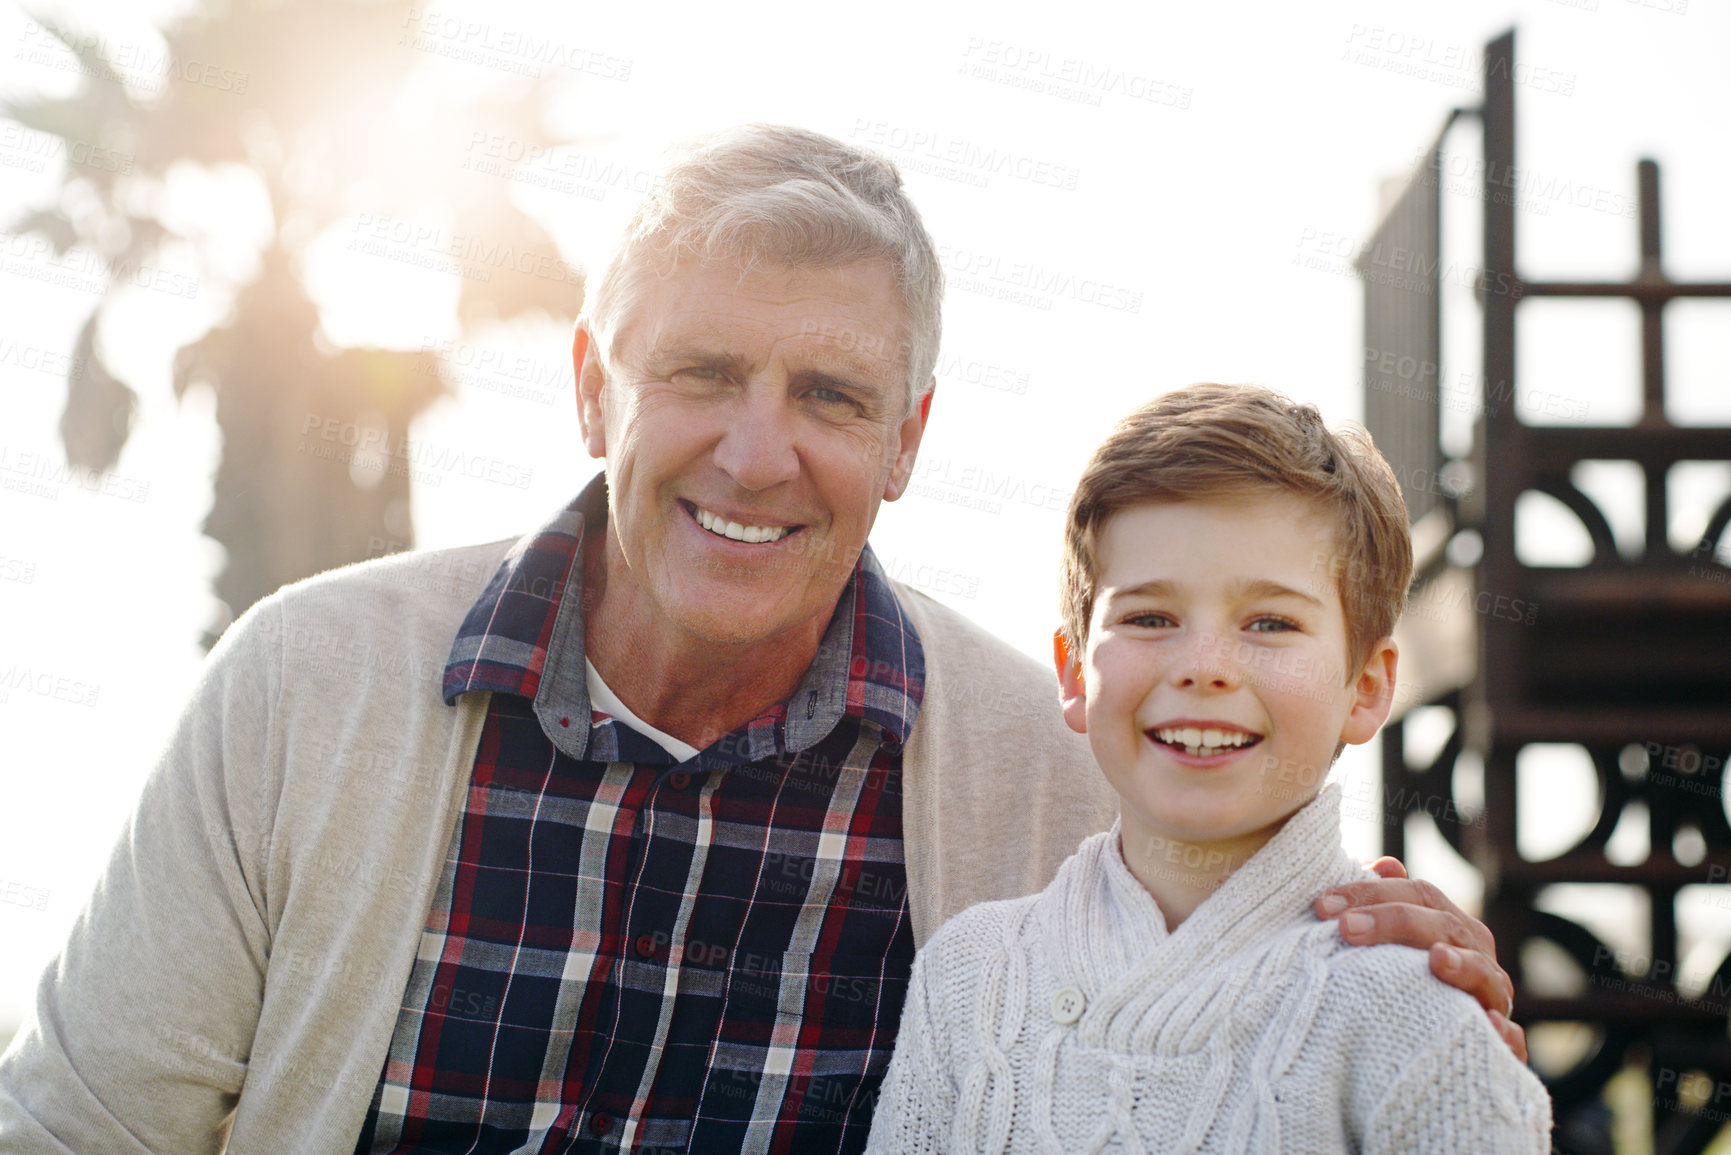 Buy stock photo Portrait of an adorable little boy posing with his grandfather while relaxing outdoors